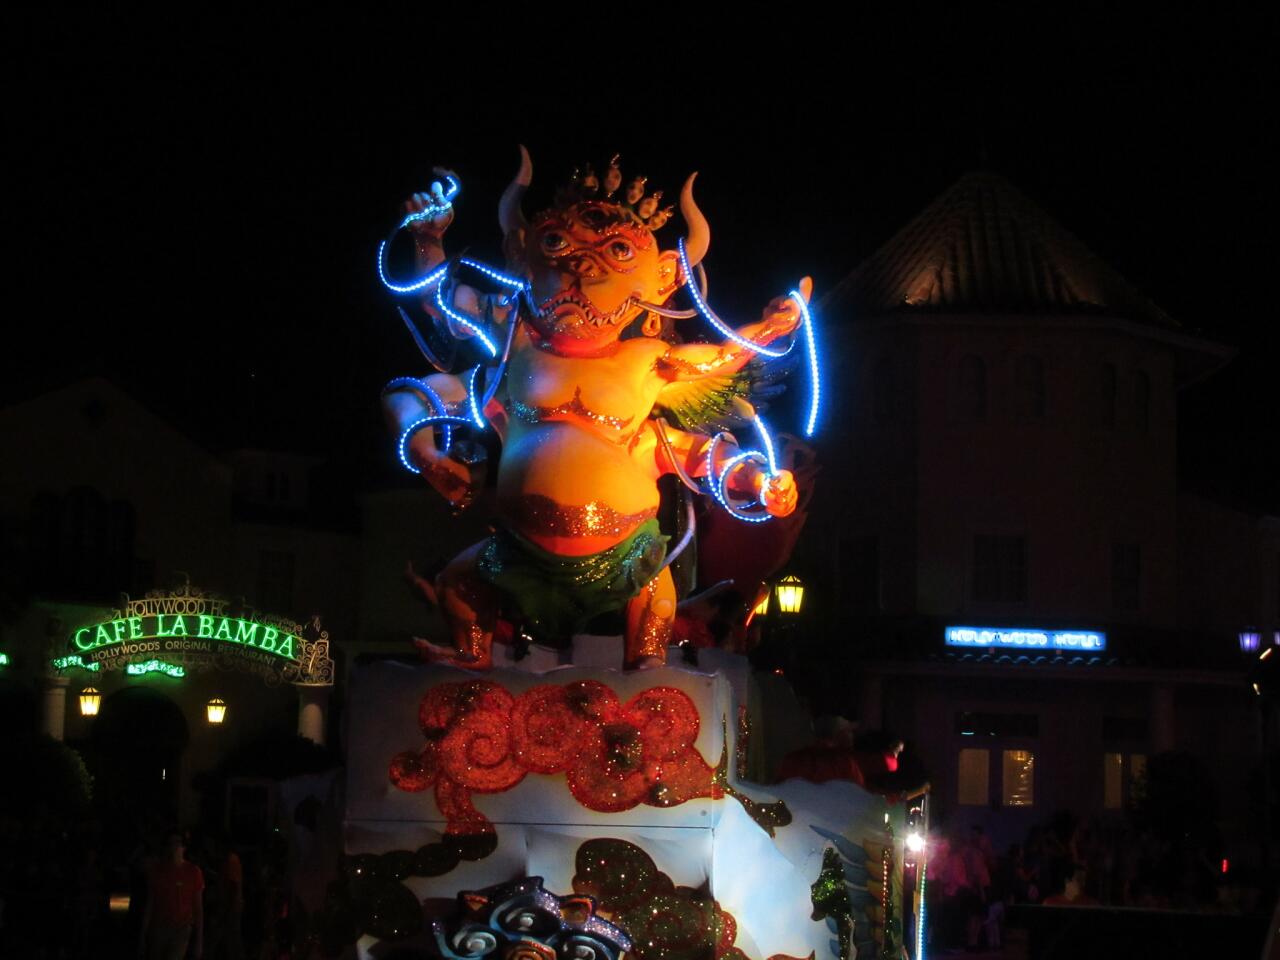 Rise of the Garuda is one of the new floats brought in for the 2017 edition of Mardi Gras at Universal Studios theme park in Orlando.